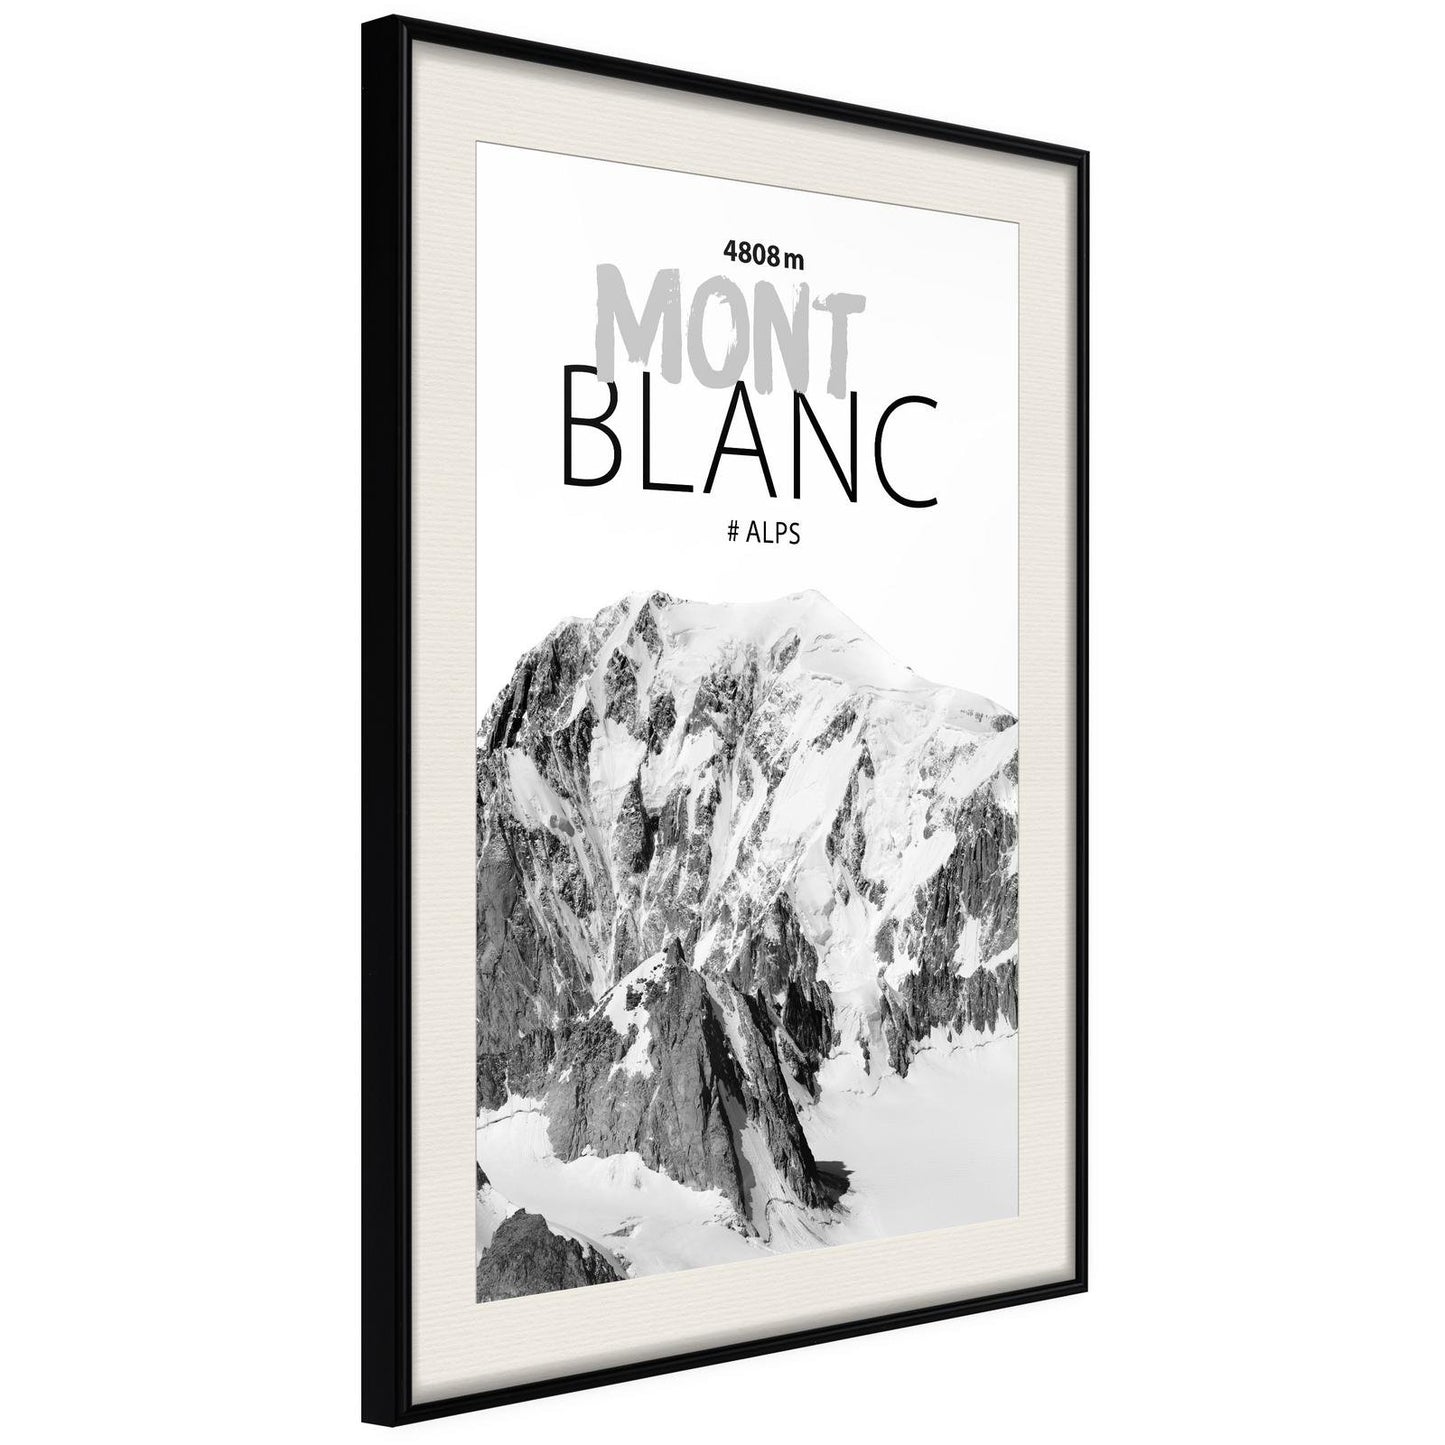 Peaks of the World: Mont Blanc